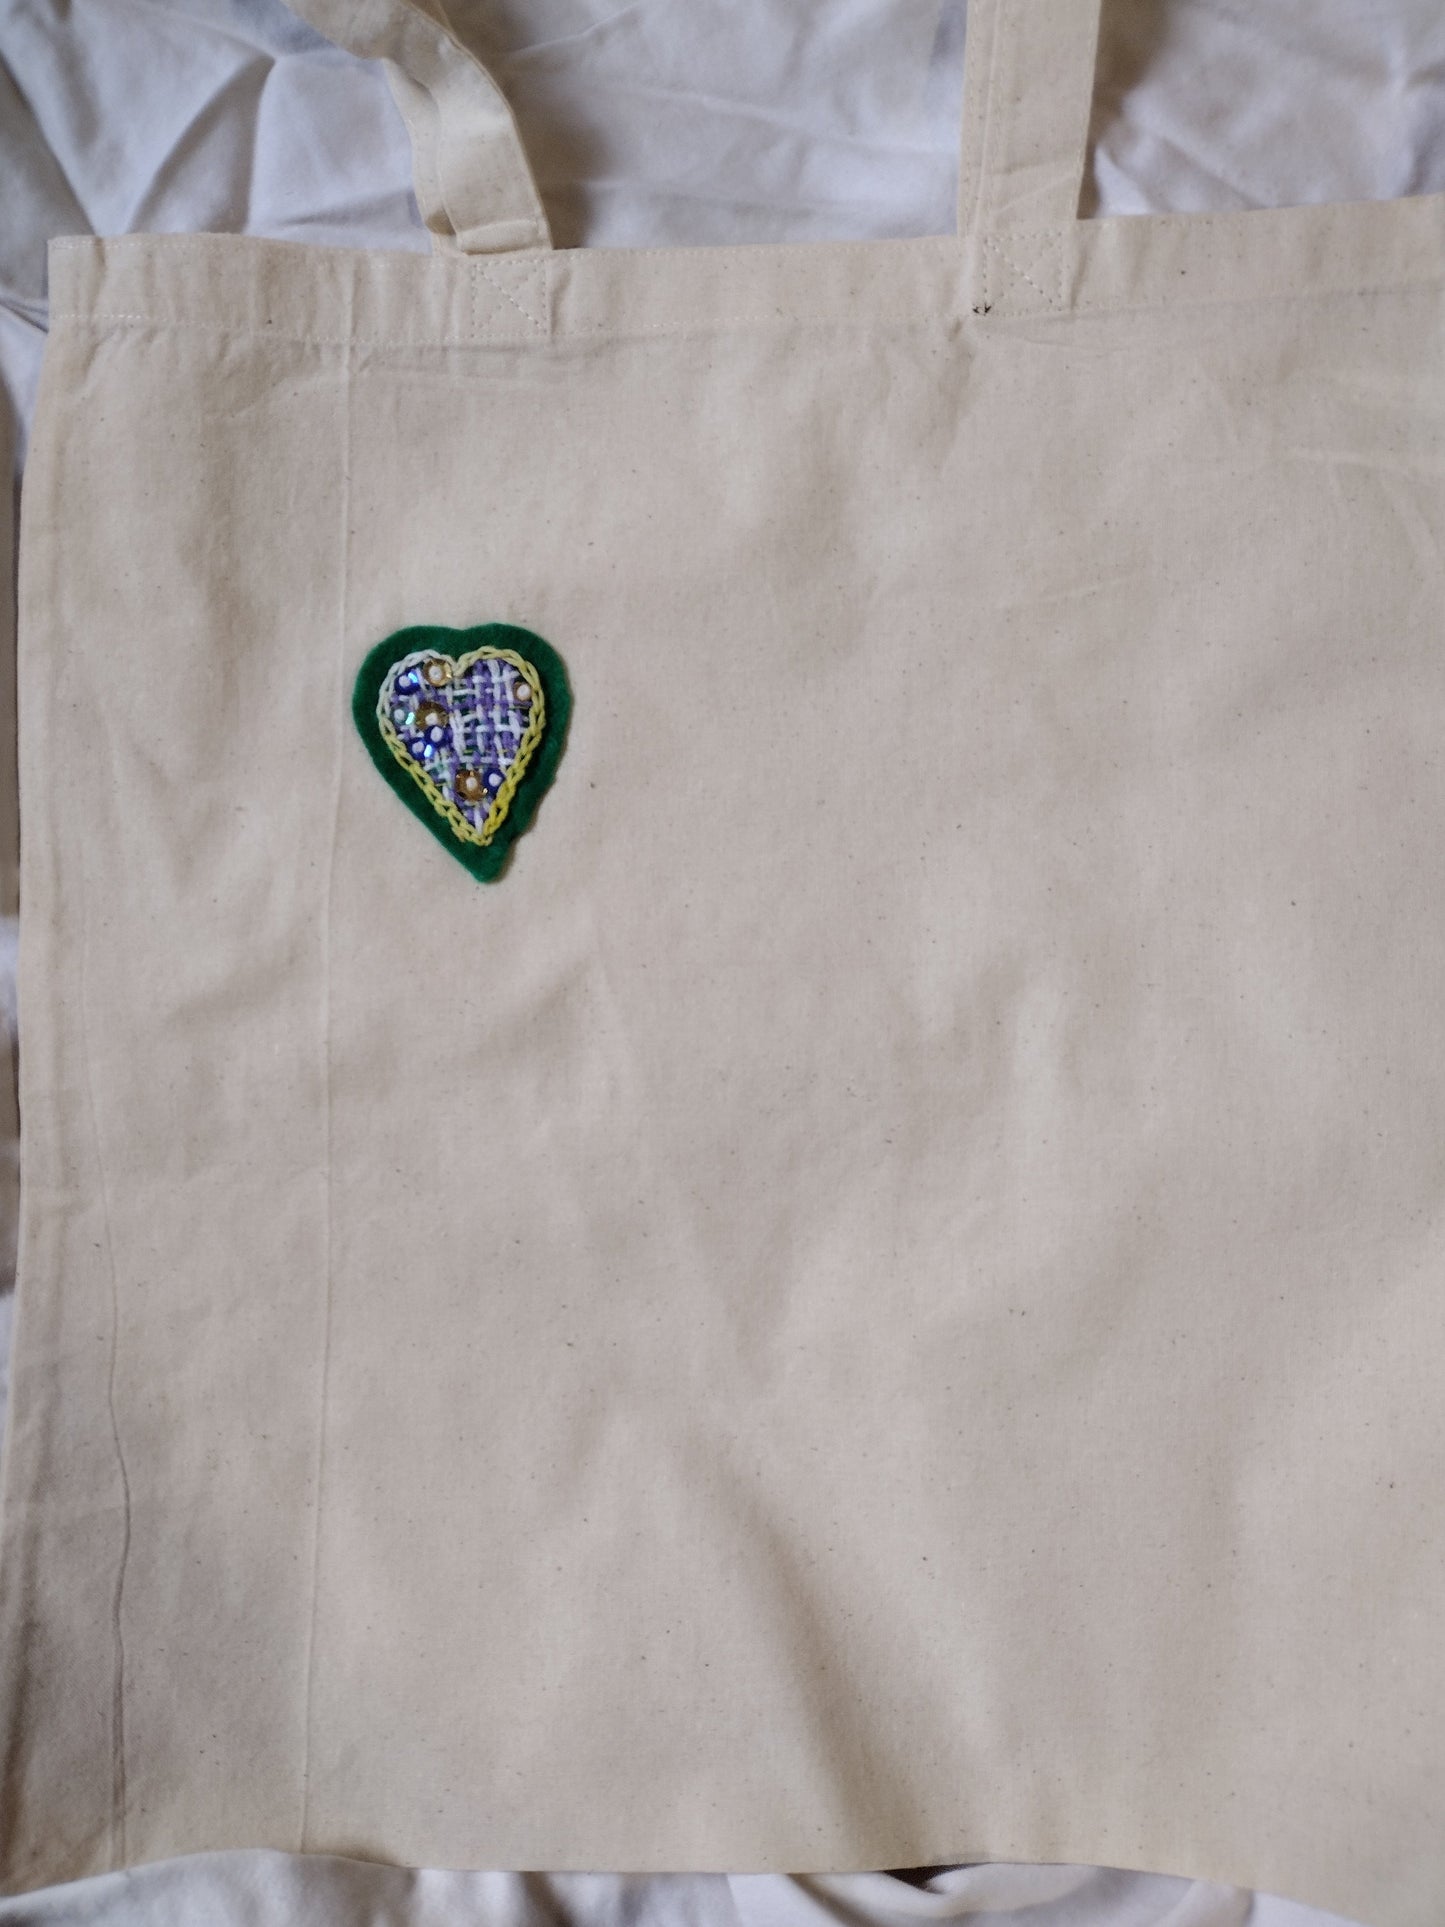 Hand embroidered tote bag - small design